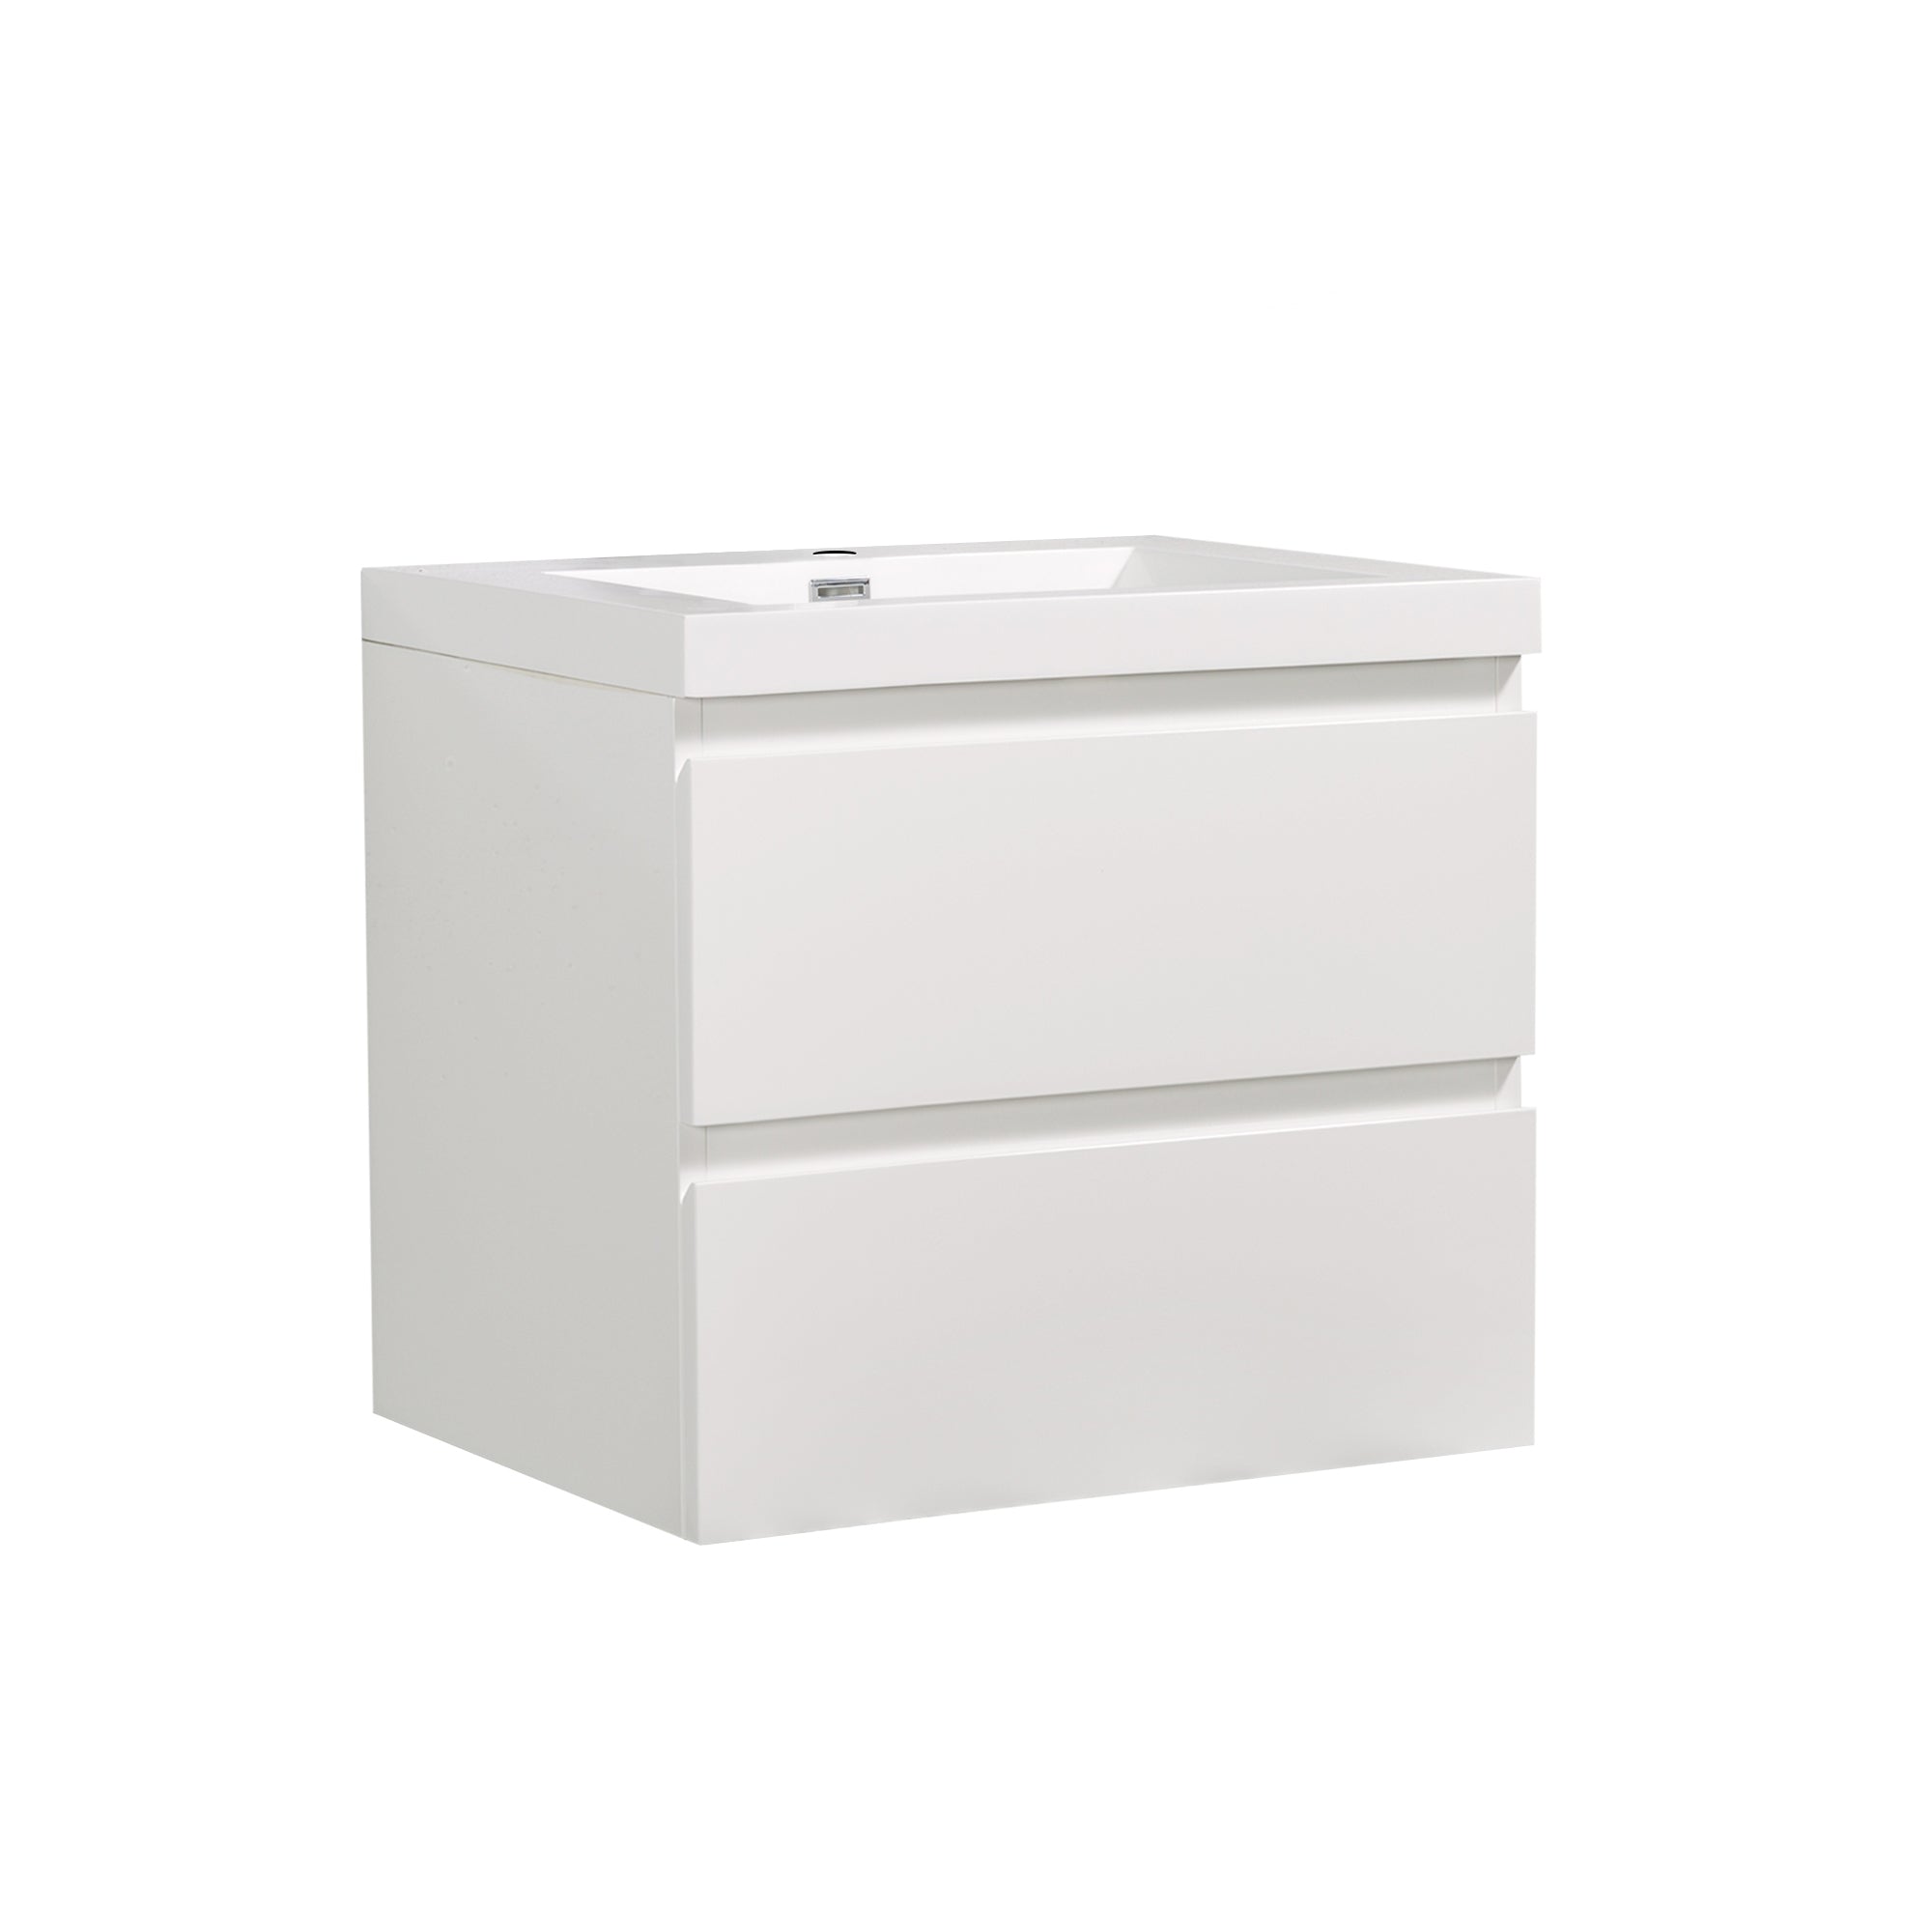 24" Bath Vanity in White with White Vanity Top and Basin